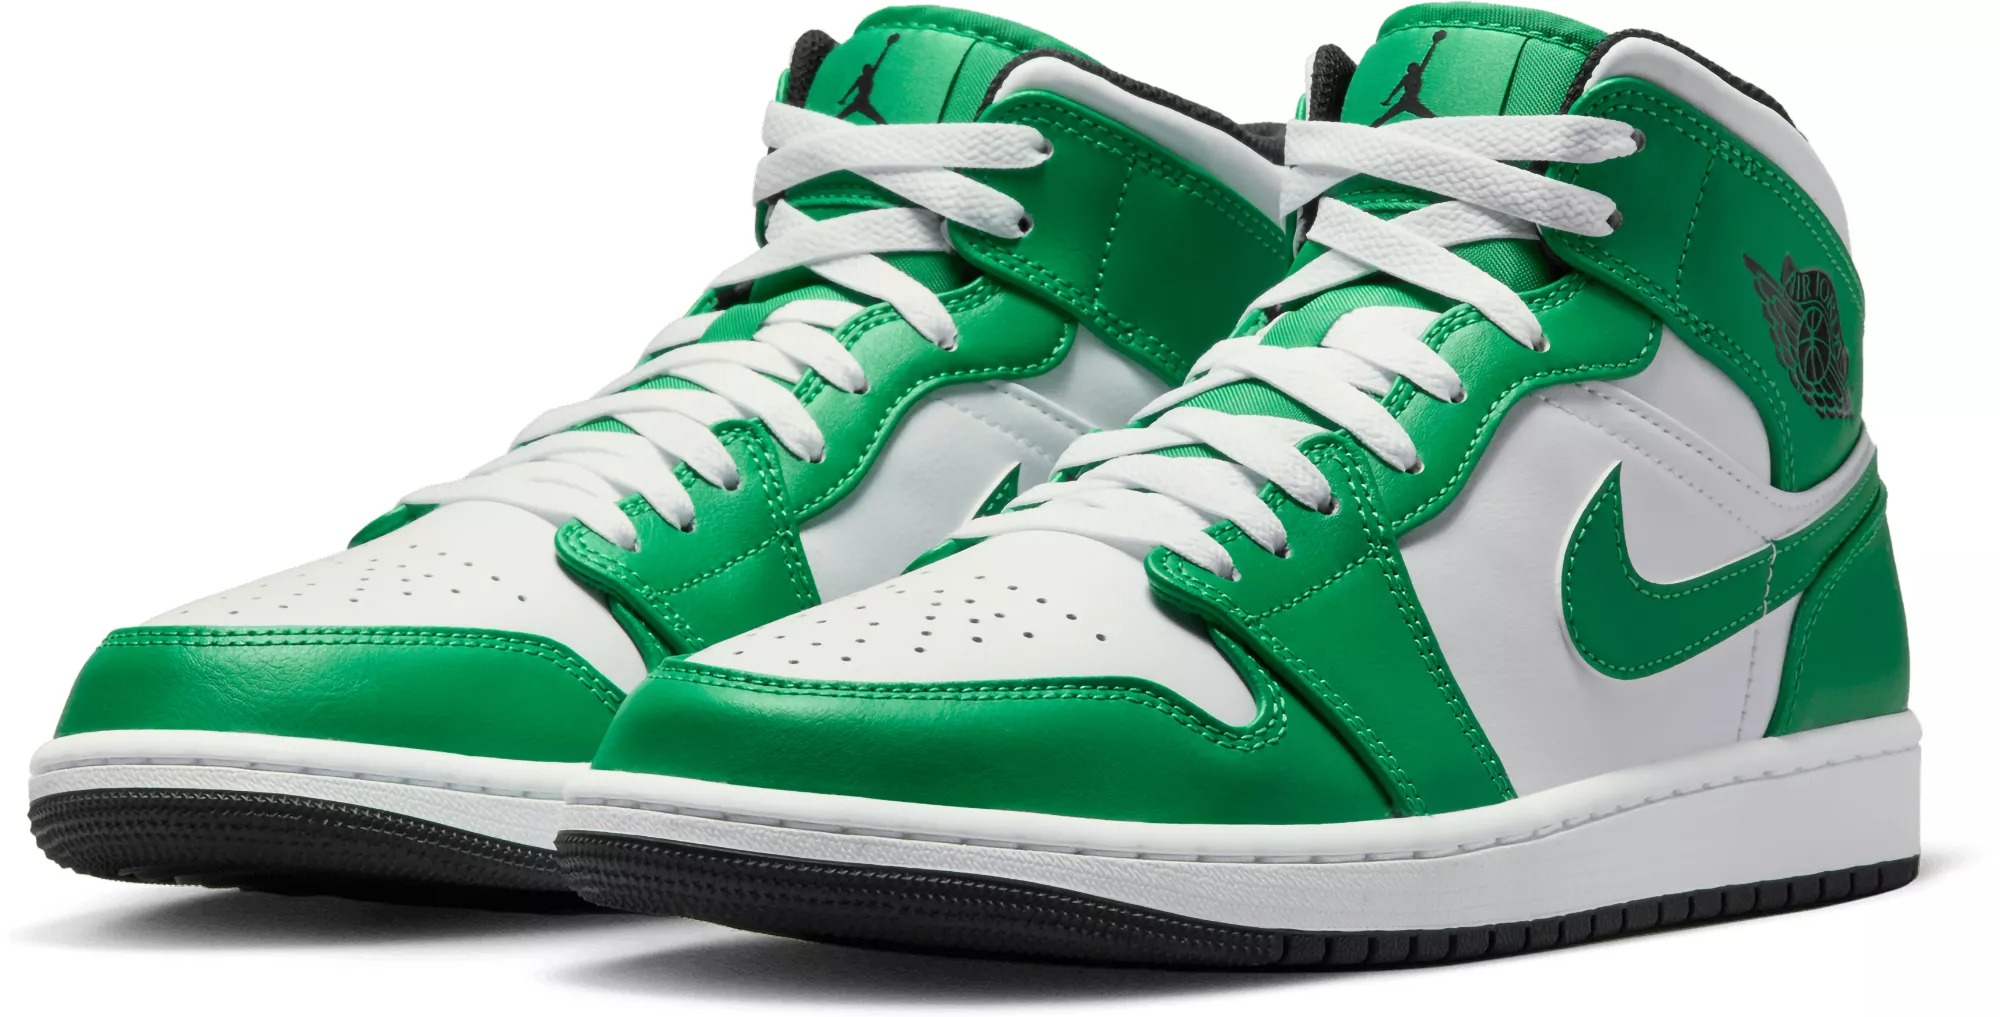 Air Jordan 1 Mid “Lucky Green” Is Available NOW